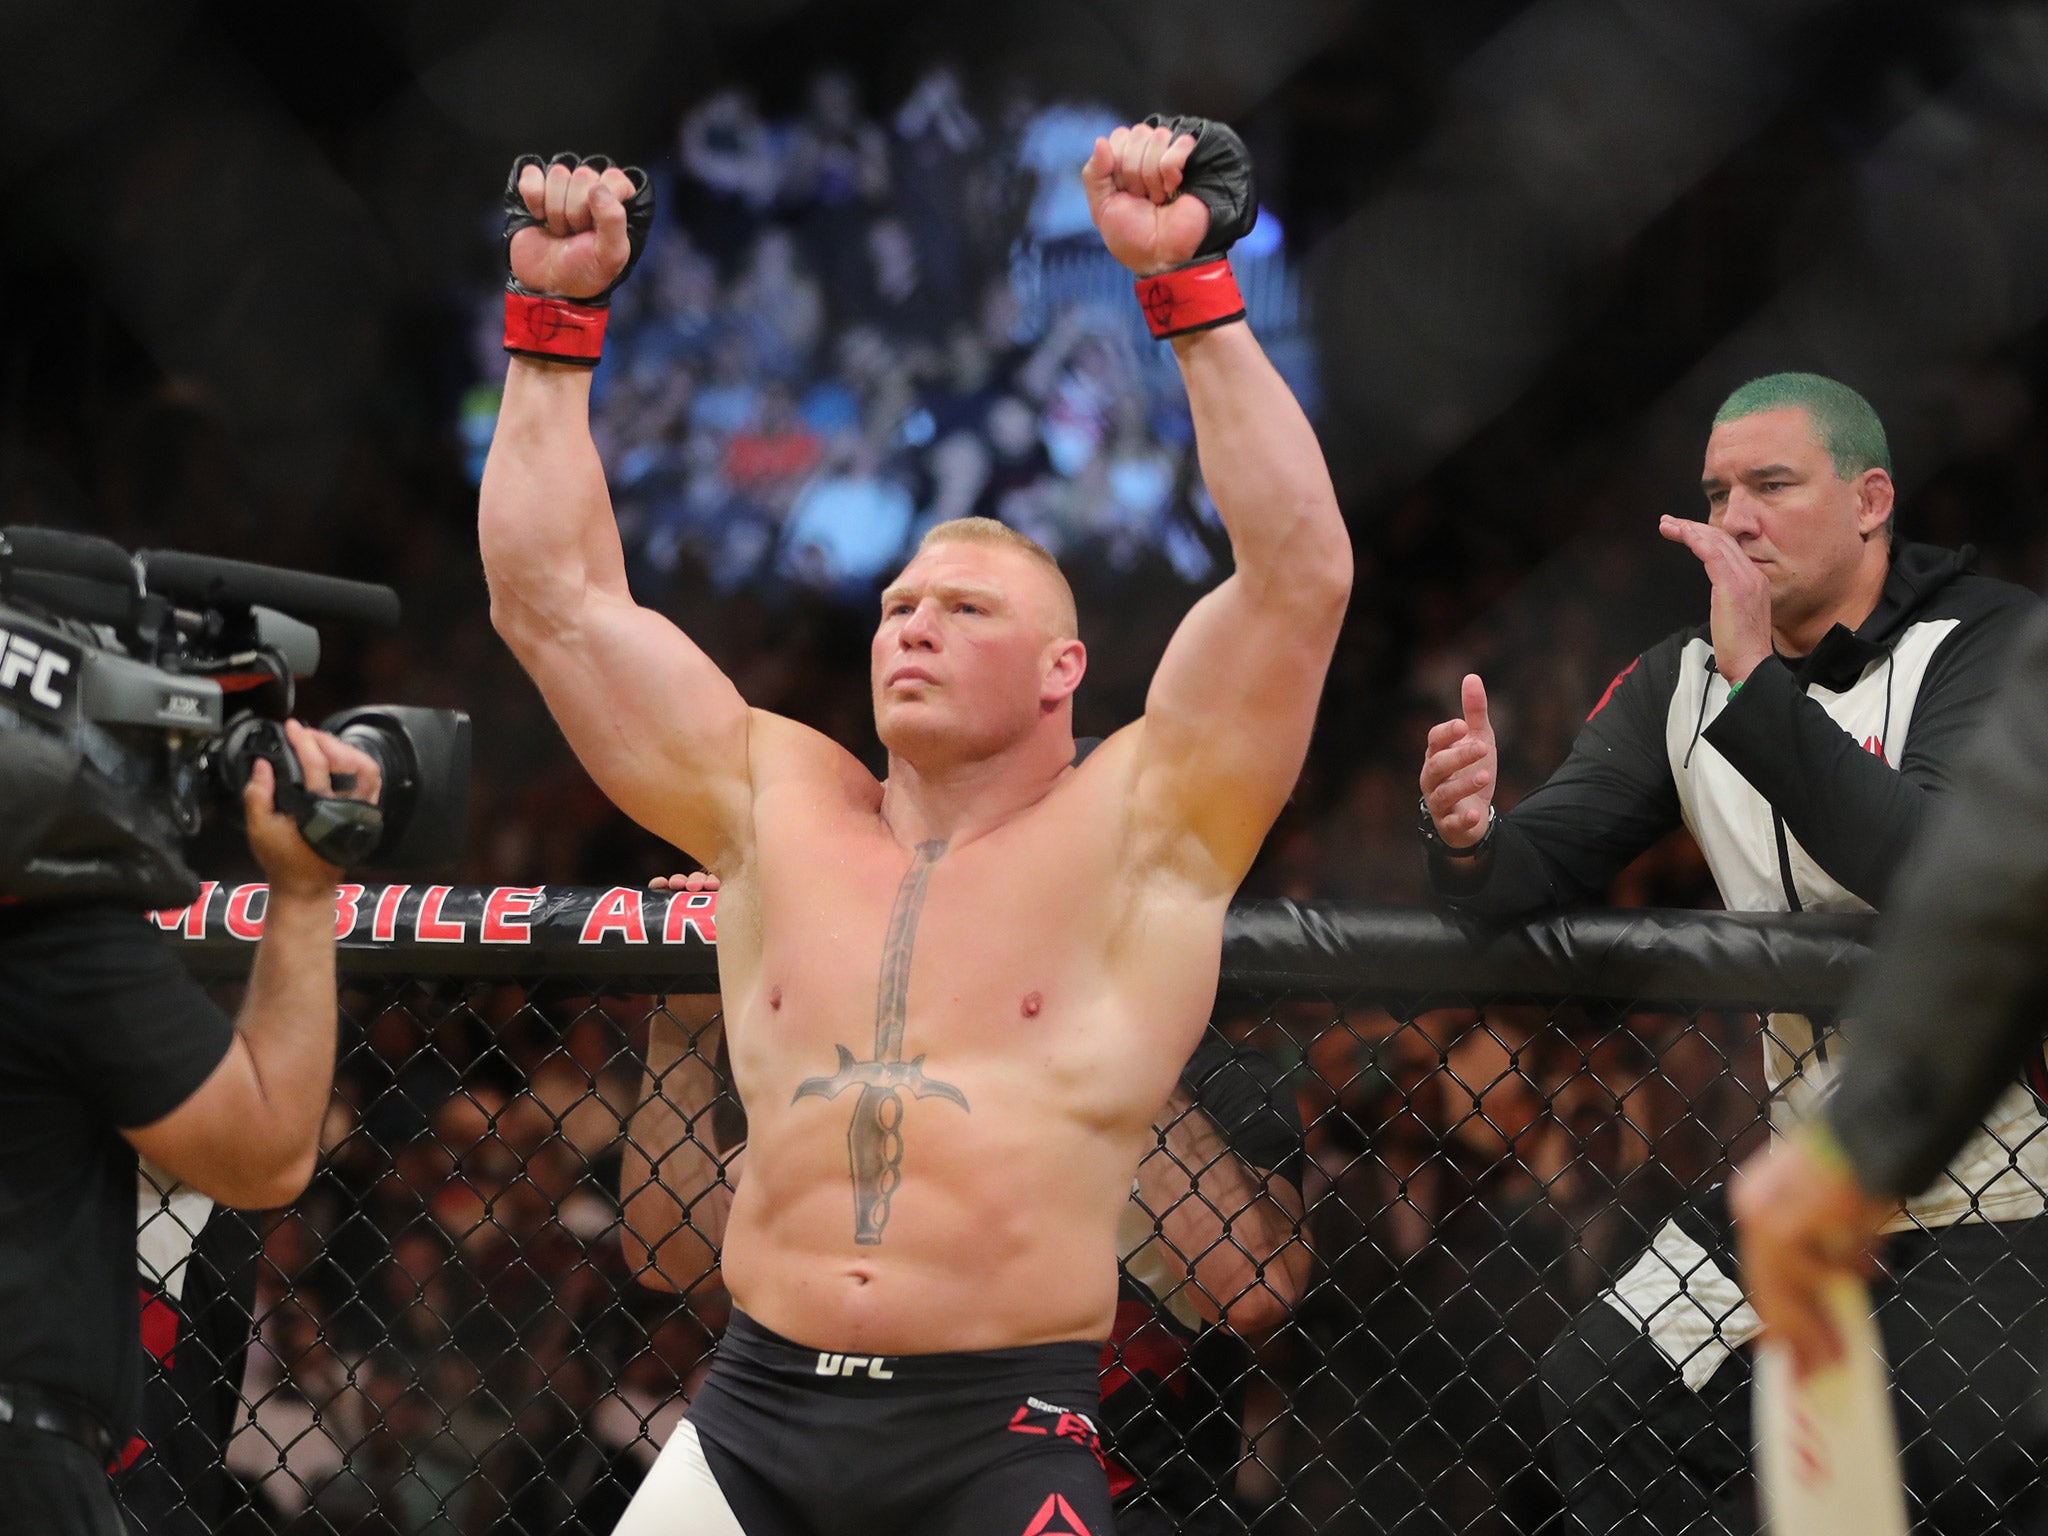 Brock Lesnar faces a two-year ban from the UFC after failing a second drug test